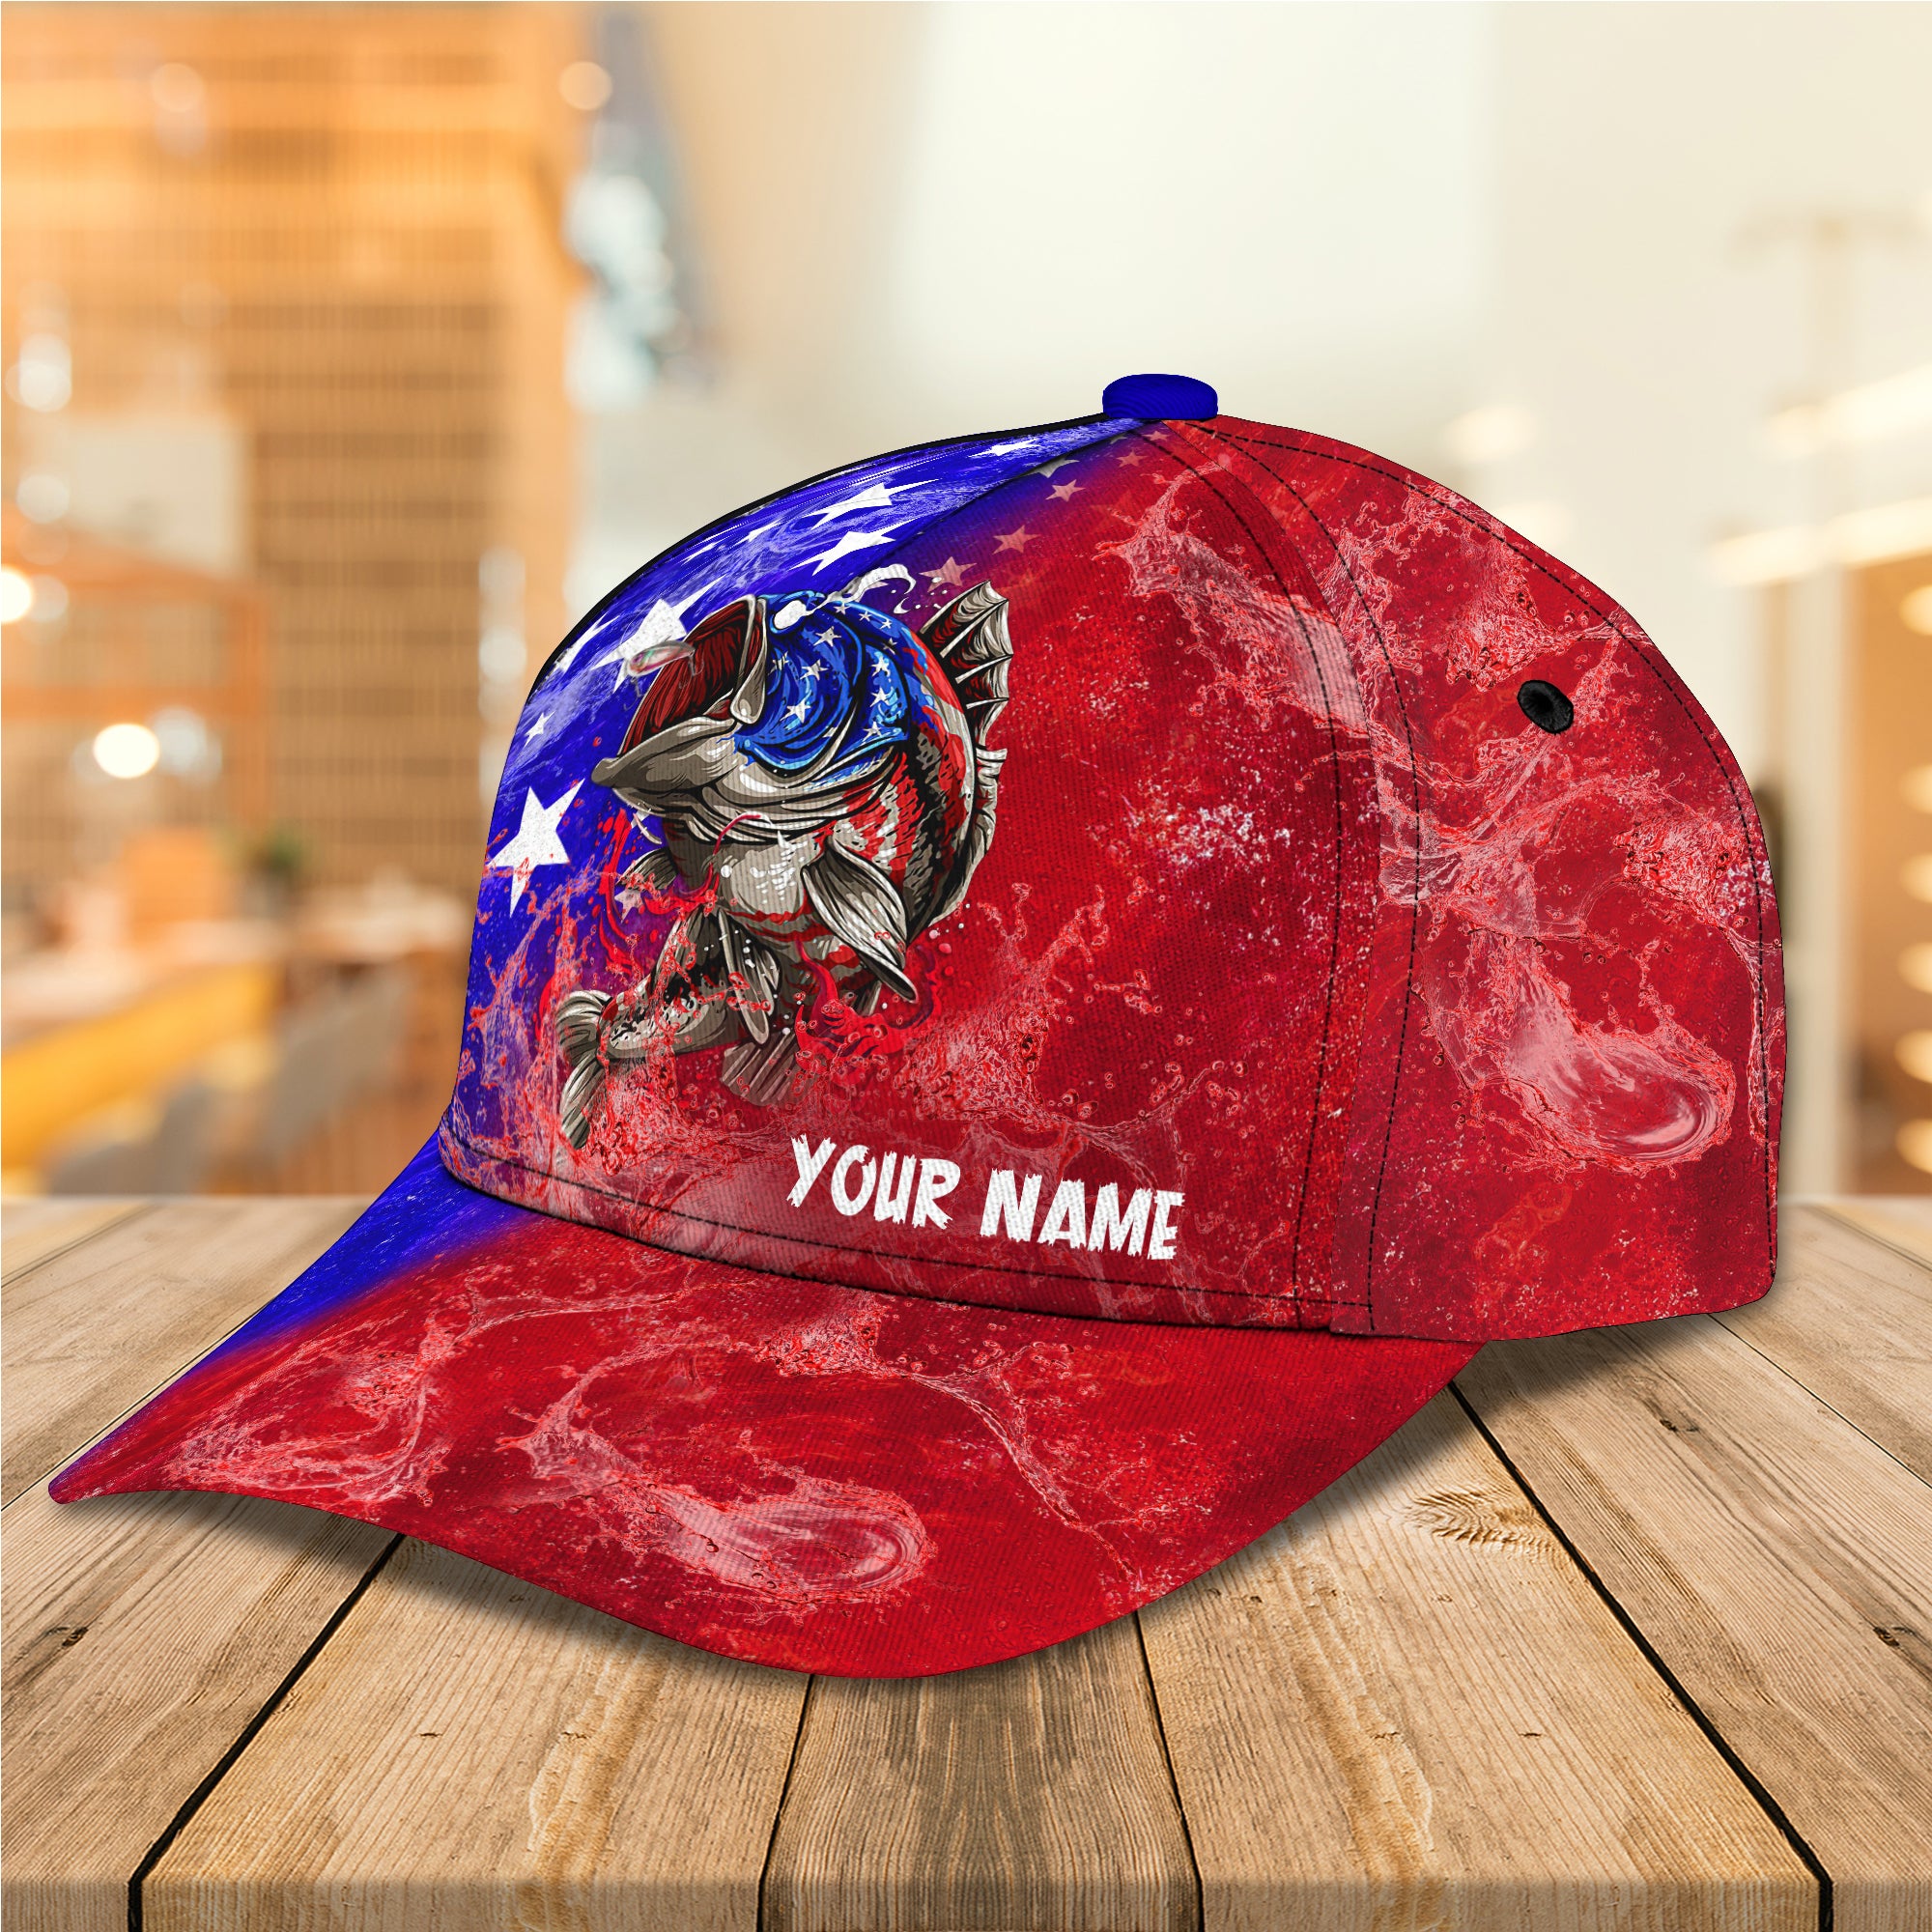 Fishing 03 - Personalized Name Cap - Pth98